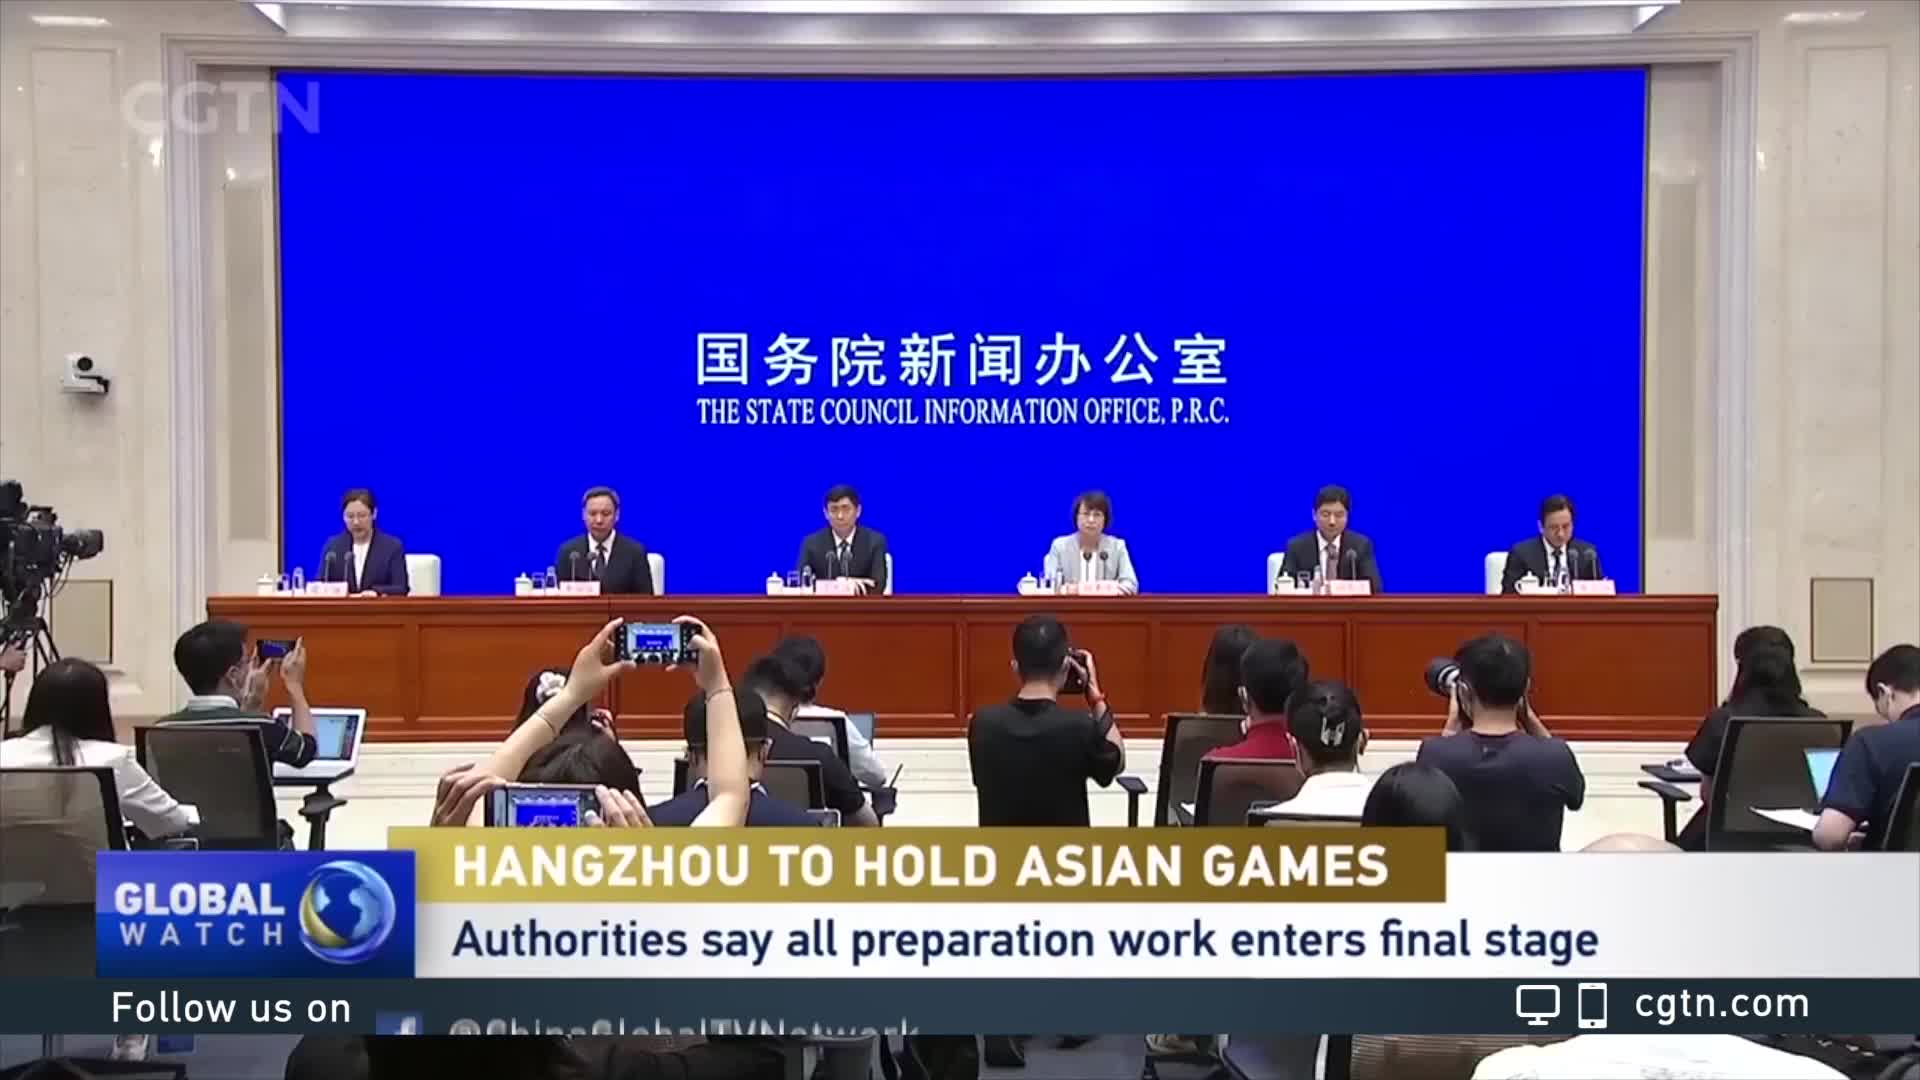 Authorities say preparations for Hangzhou Asian Games are in the final stage